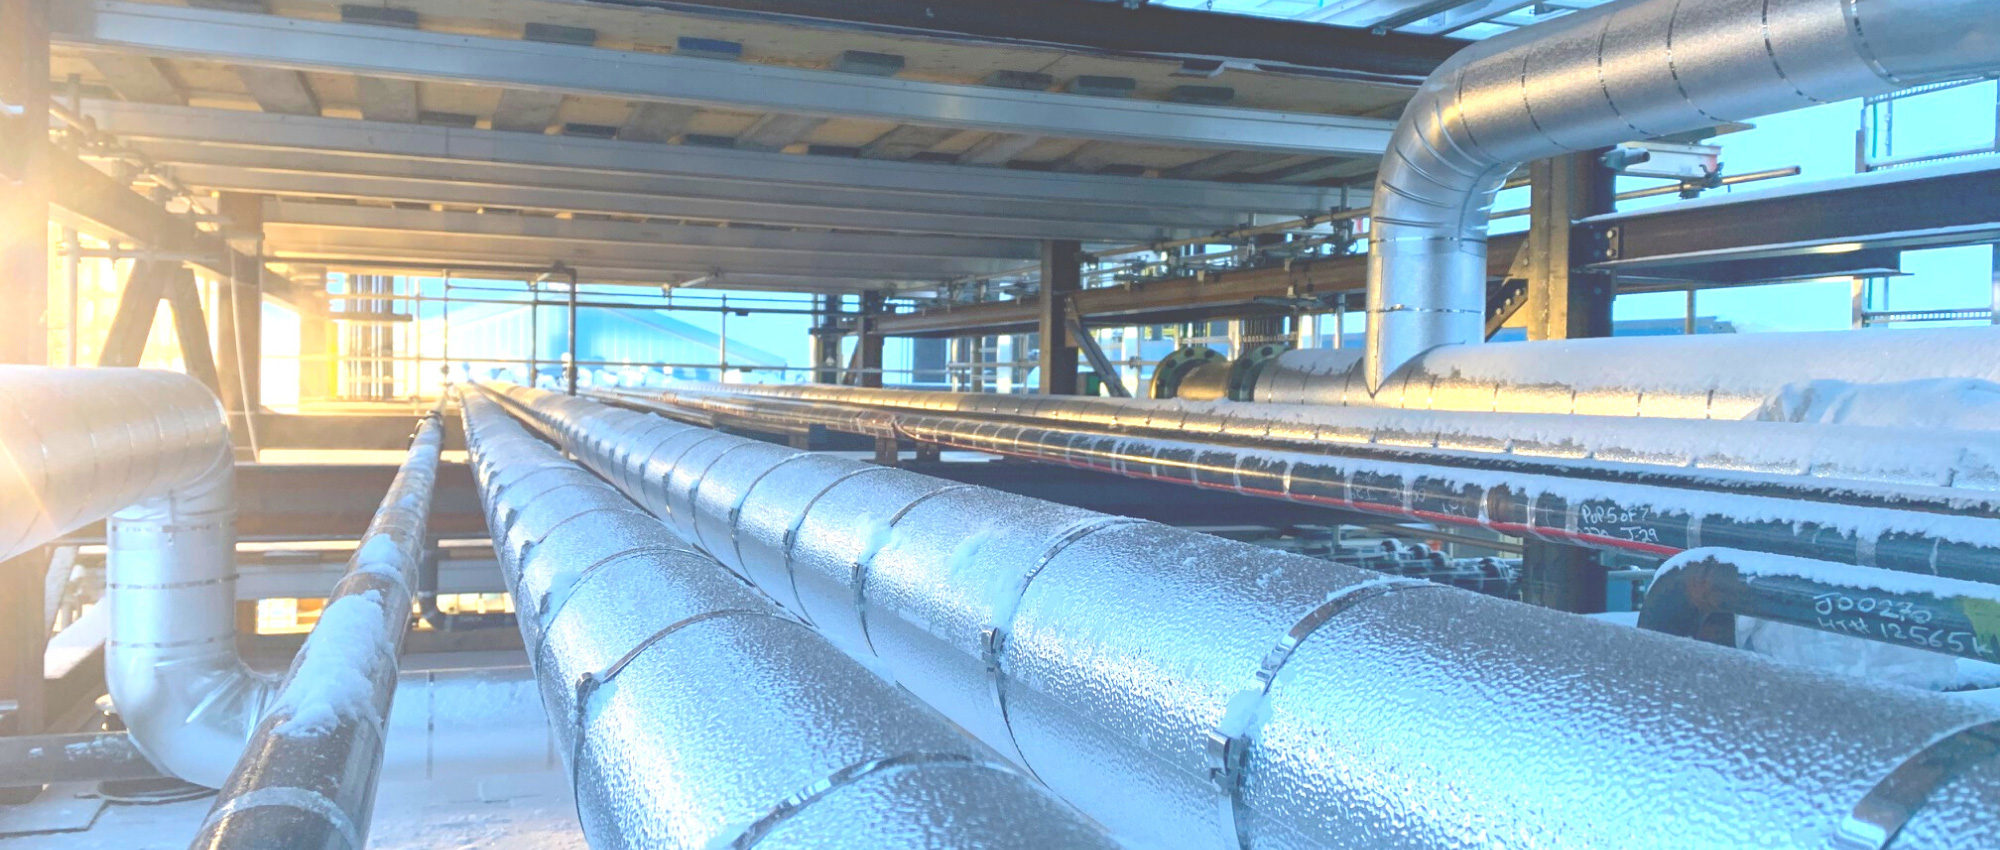 Pipes-insulation